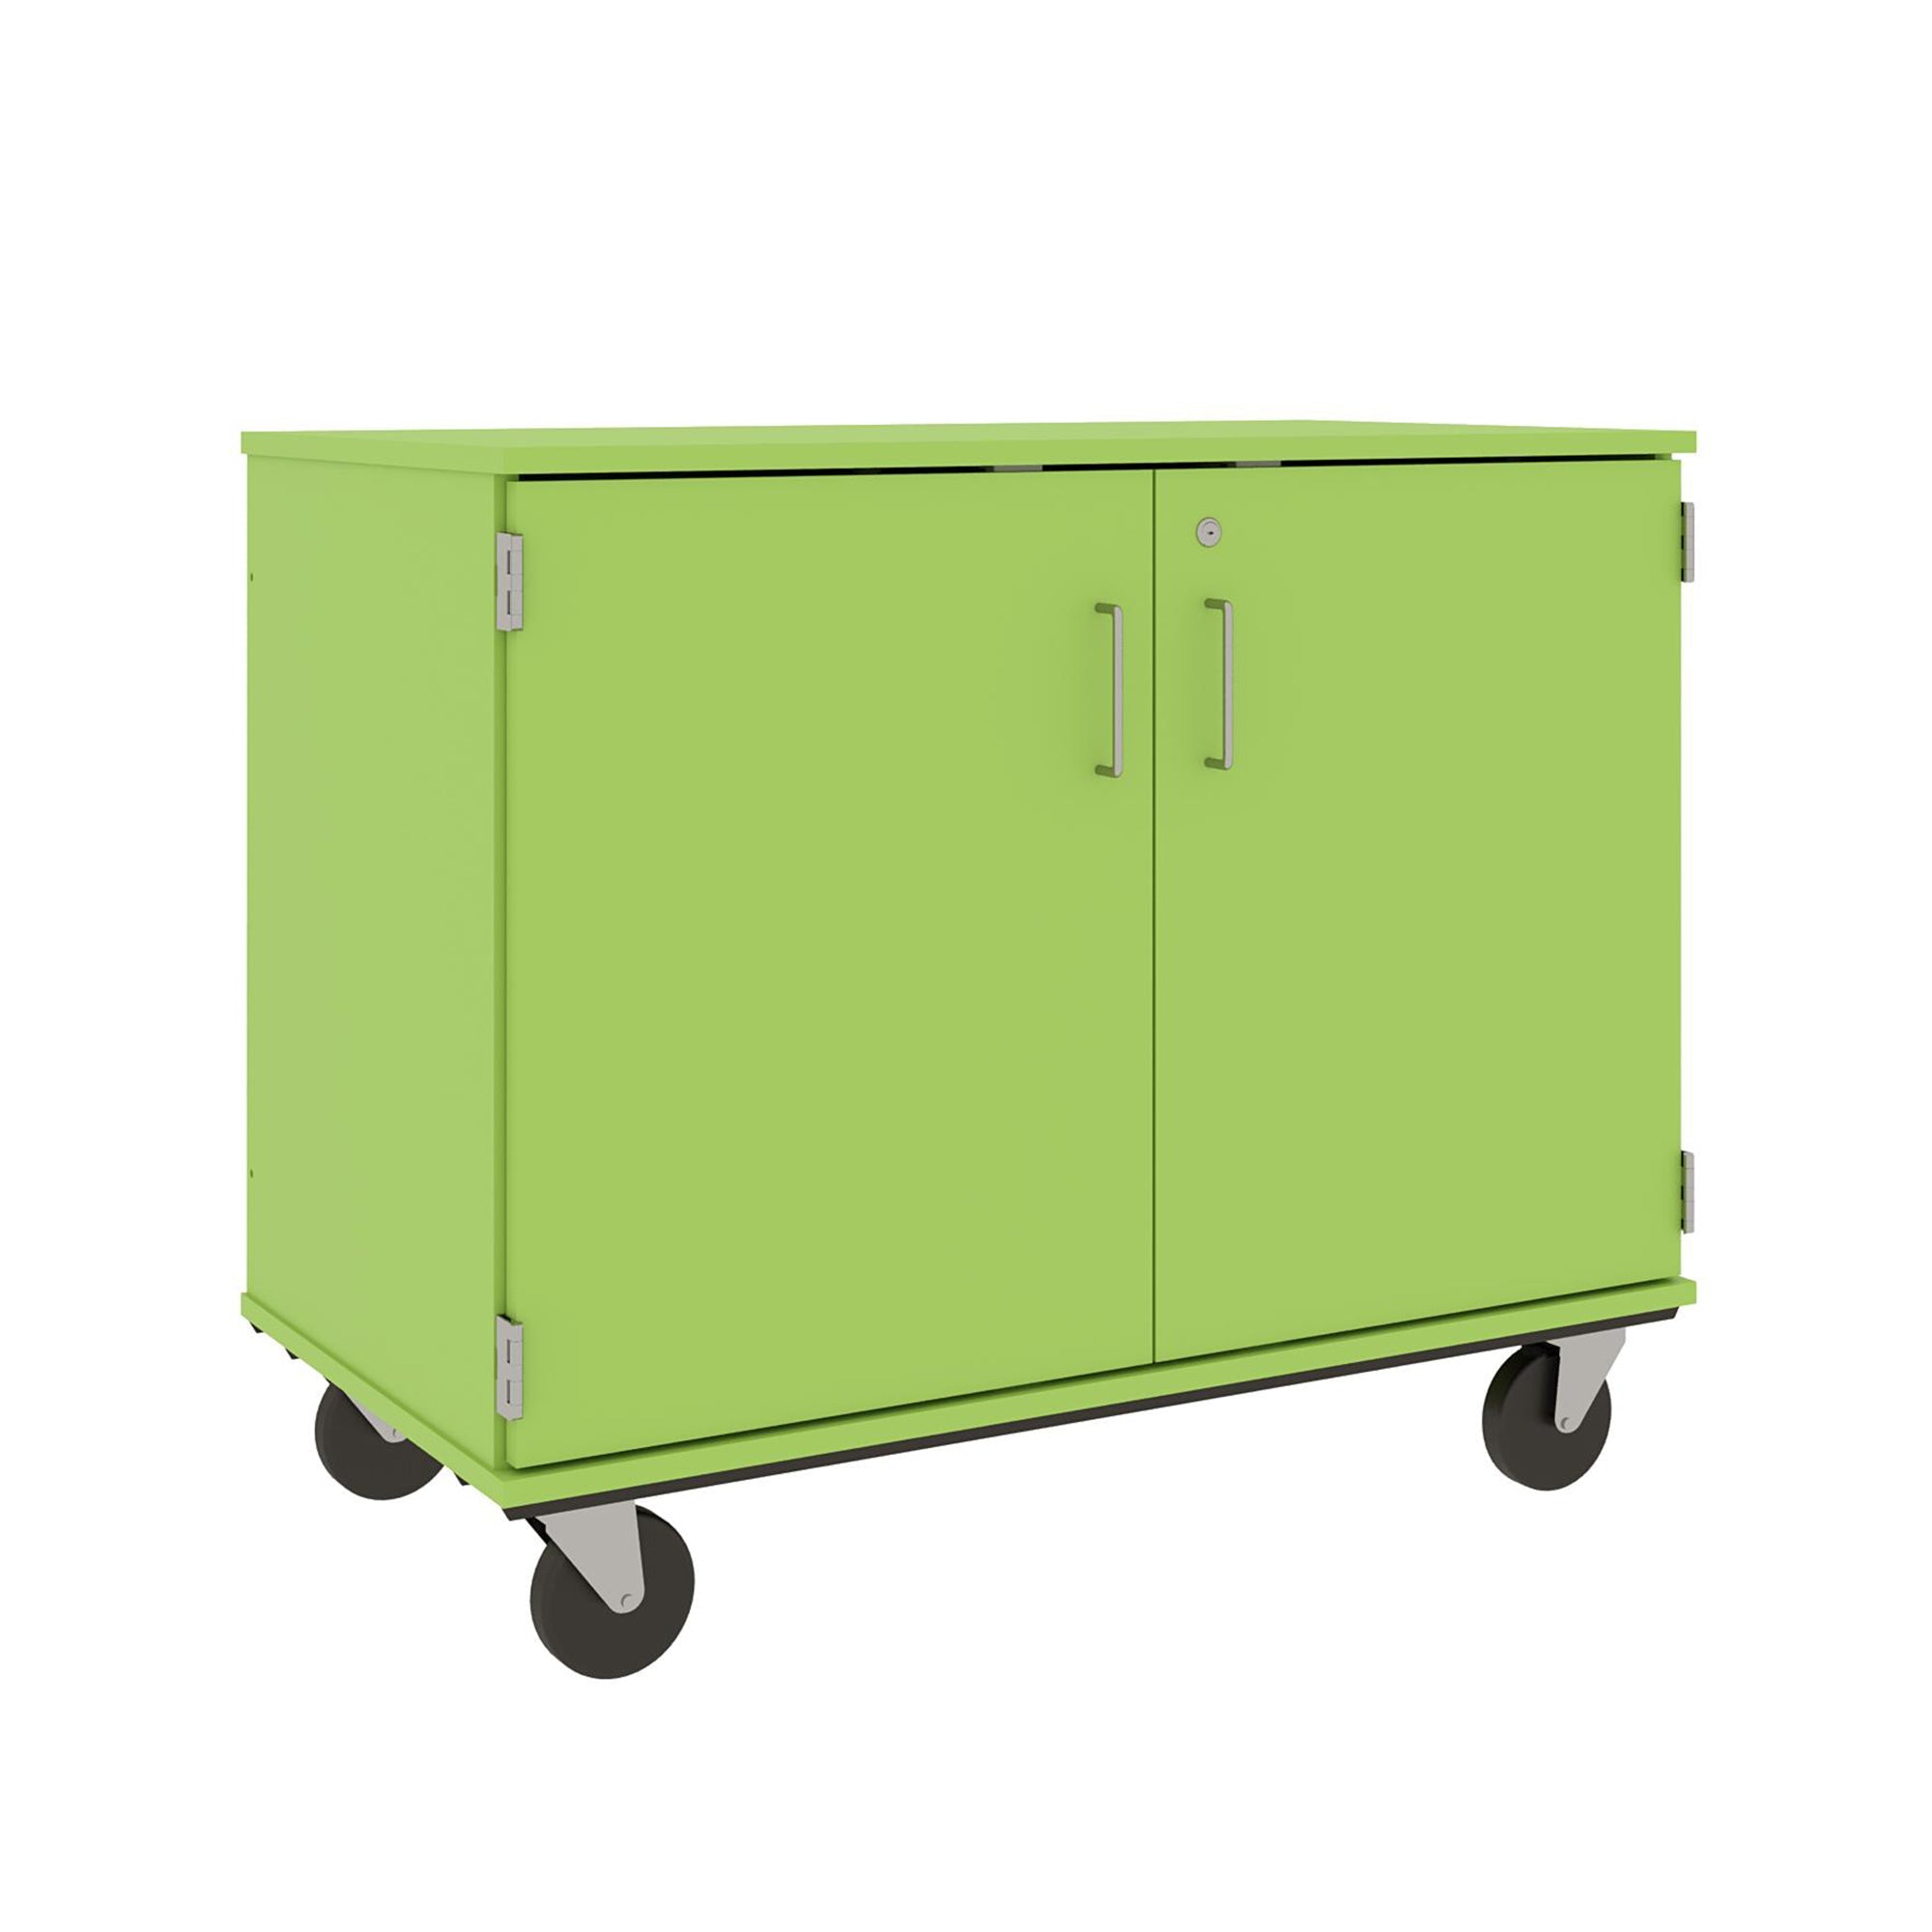 36" Assembled Mobile Bin Storage Cabinet with Doors and 18 3" Bins - 80243 F36